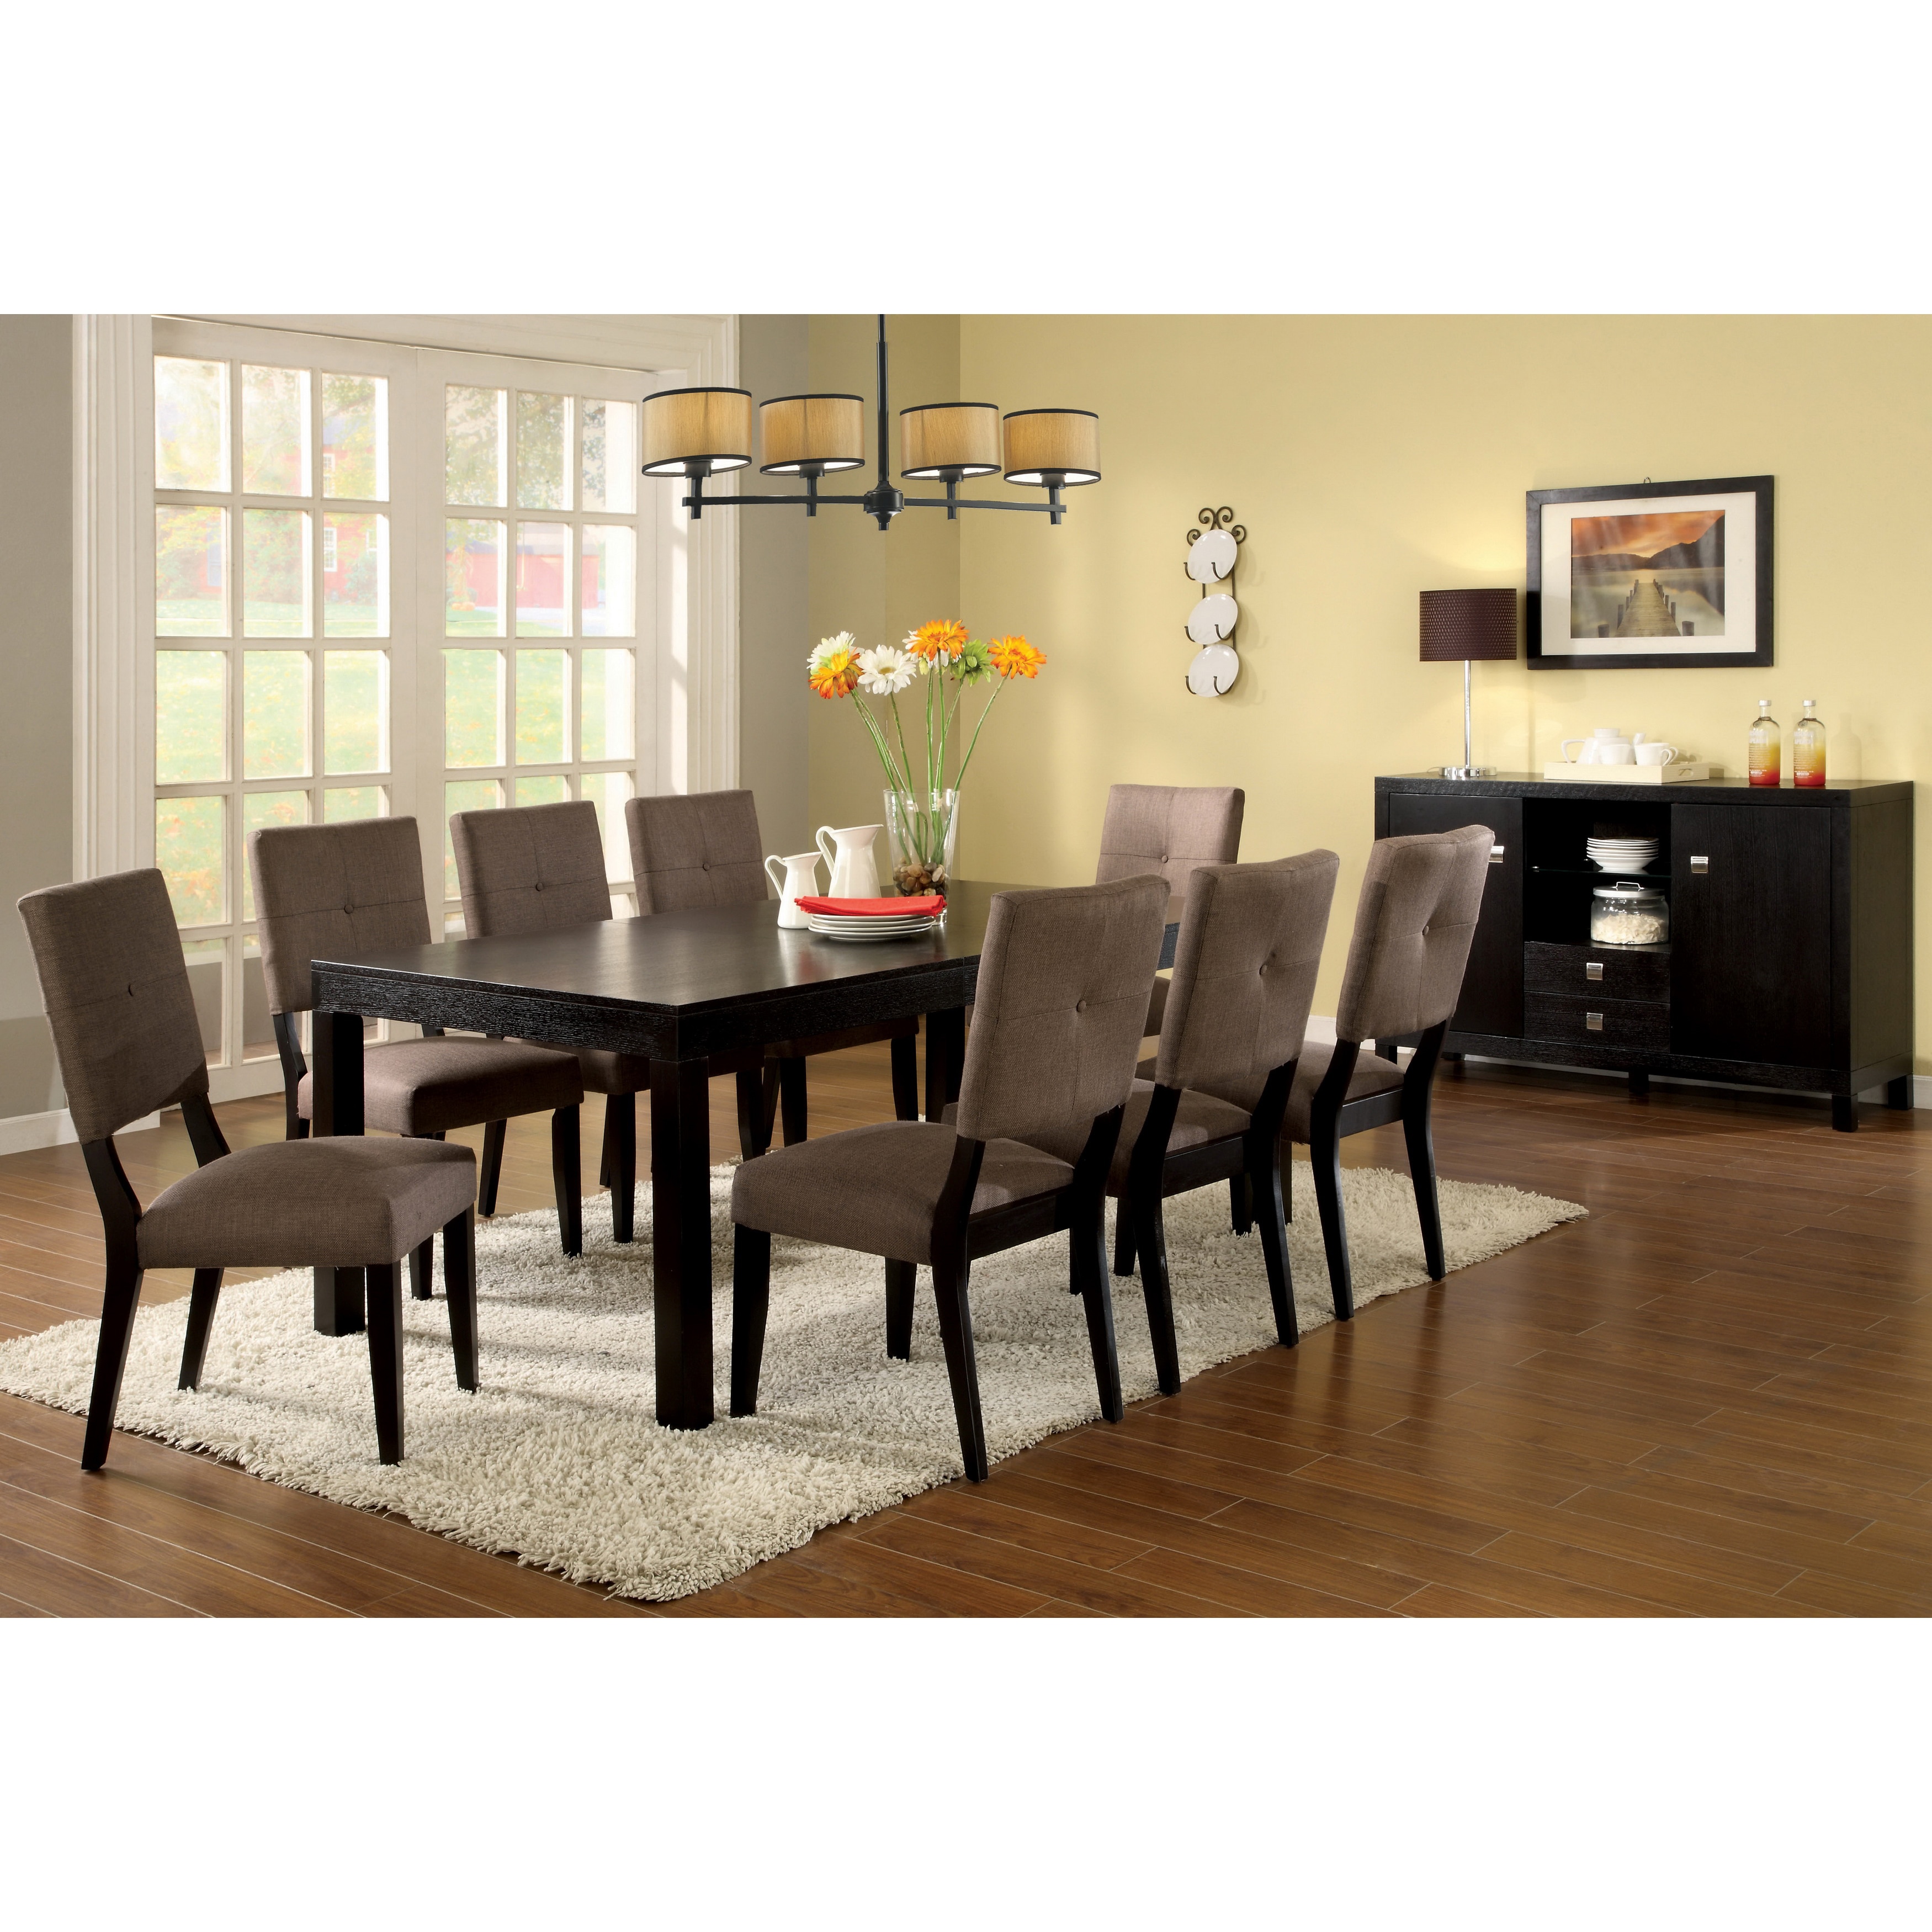 Furniture Of America Catherine Espresso 7 pc Dining Set With Removable Leaf